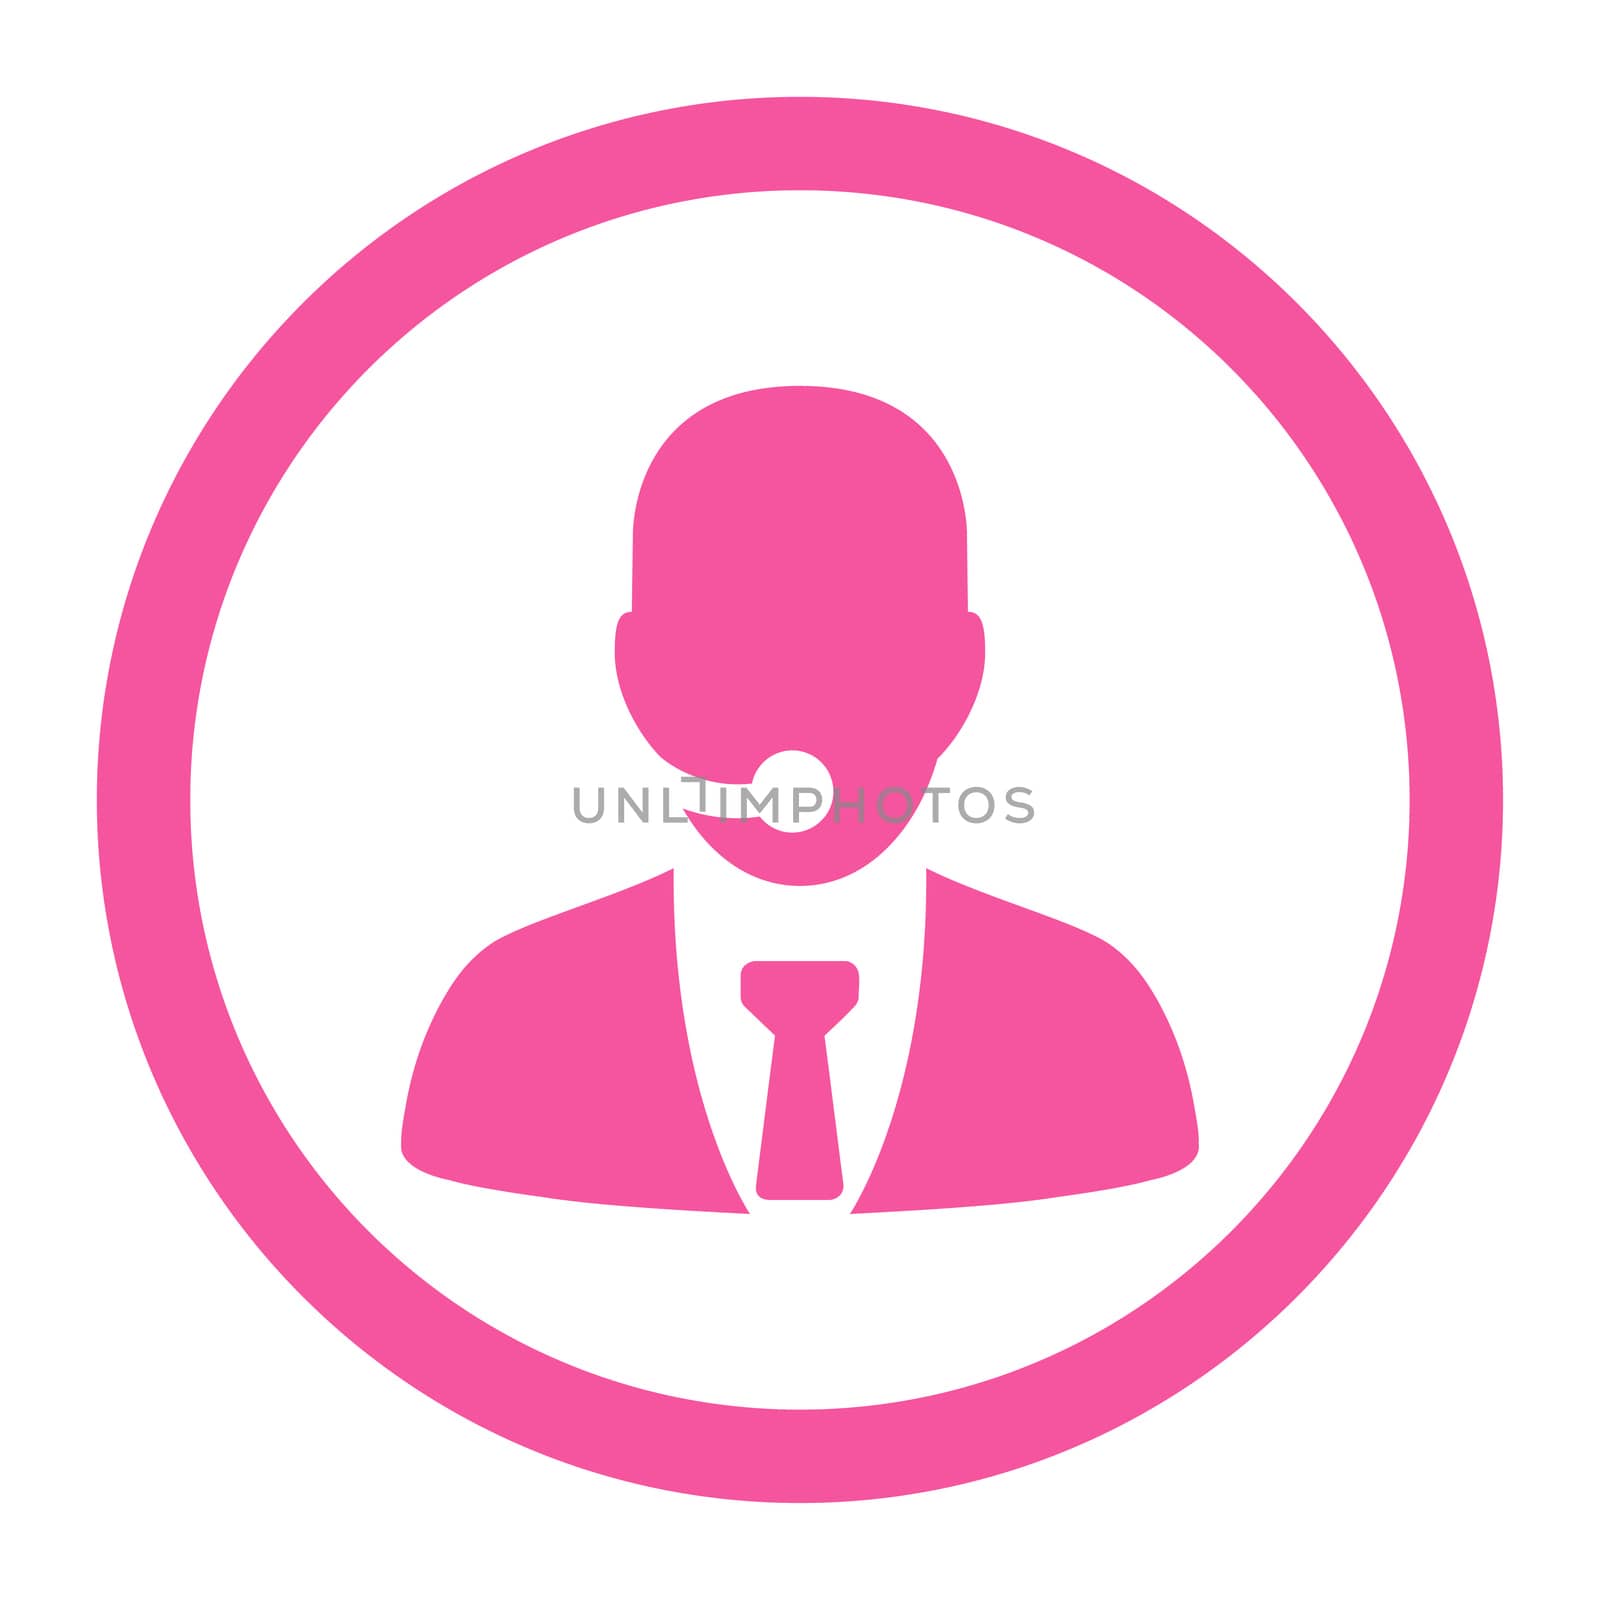 Call center operator glyph icon. This rounded flat symbol is drawn with pink color on a white background.